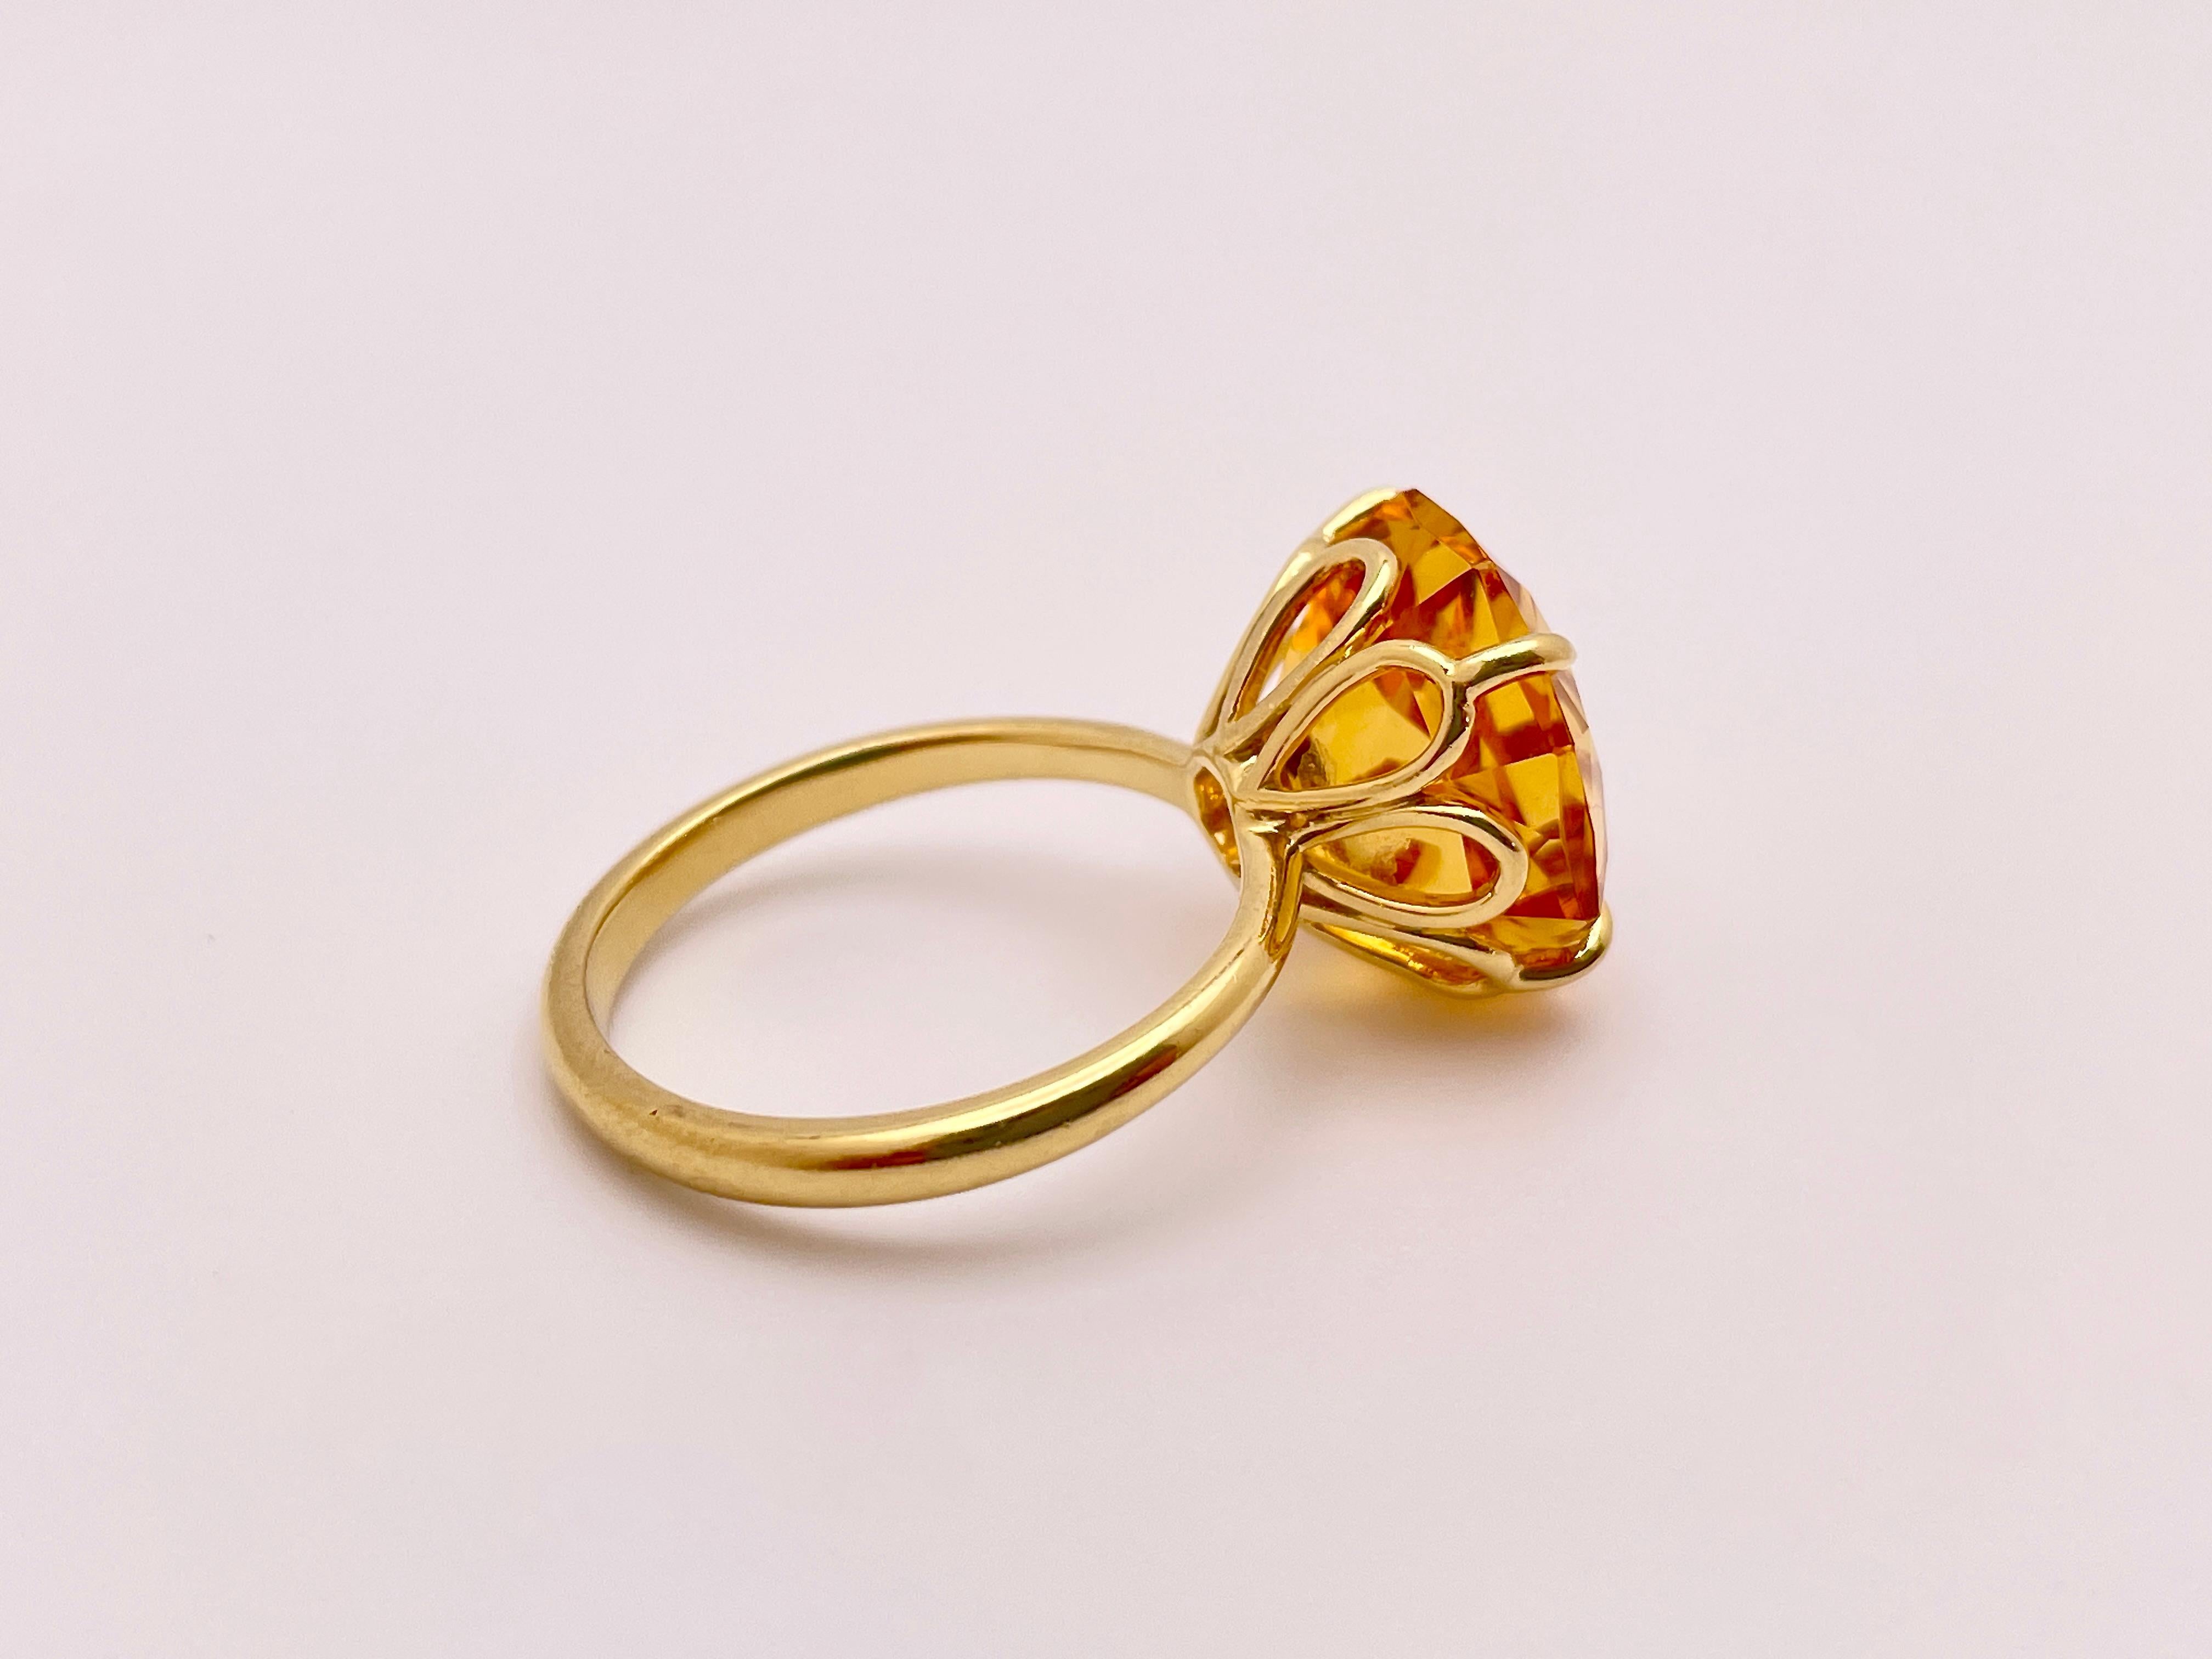 A beautiful 18K yellow gold Elsa Peretti Tiffany and Co. yellow citrine ring. Centred with a golden-yellow octagon cut citrine weighing approximately 10 CT. This ring is size 7.00 US (sizable), and it has a gross weight of 5.50 grams. 